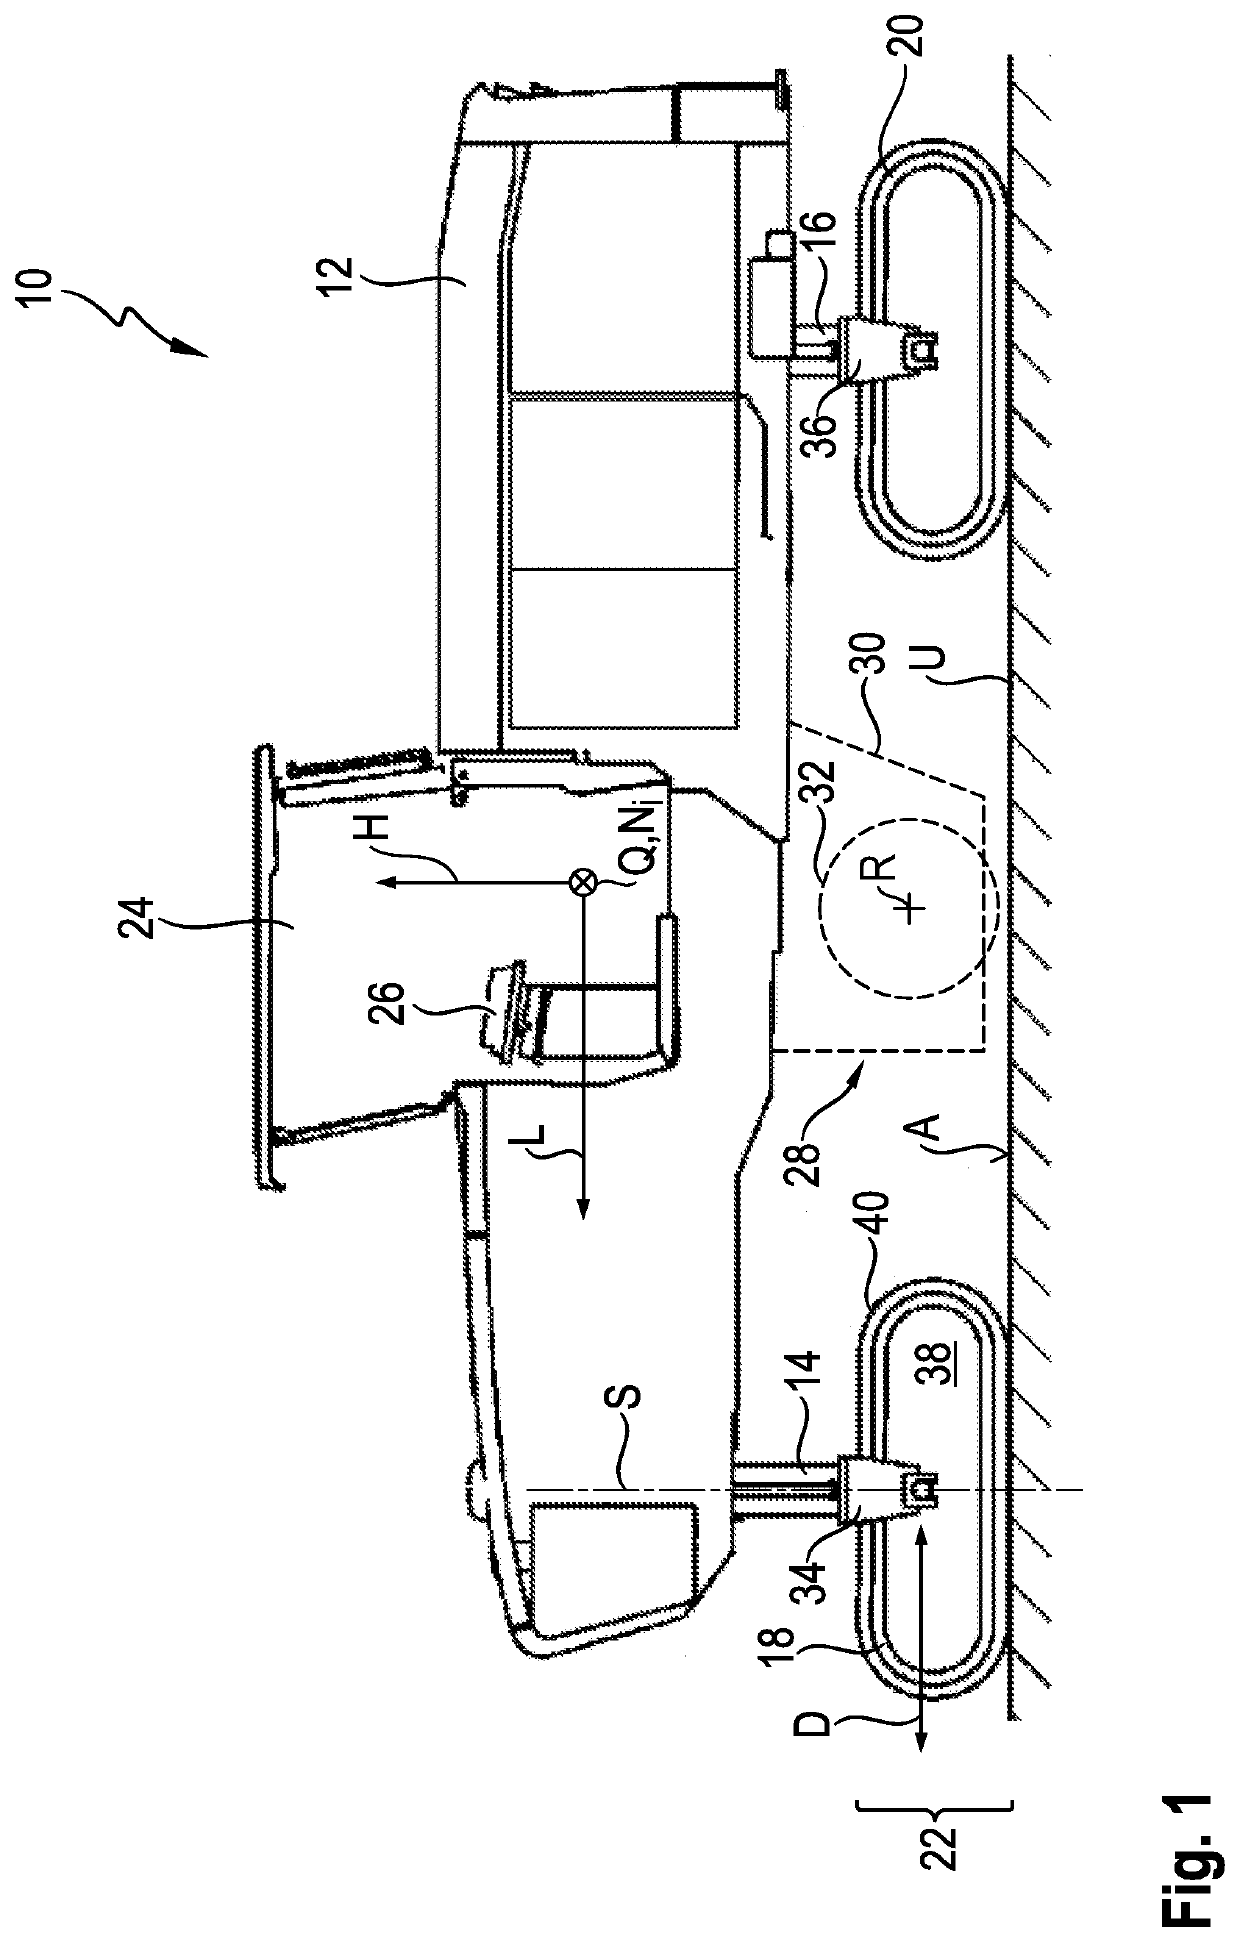 Method for Coupling a Machine Frame of an Earth Working Machine to a Working Device, Earth Working Machine, and Connecting Apparatus for the Method